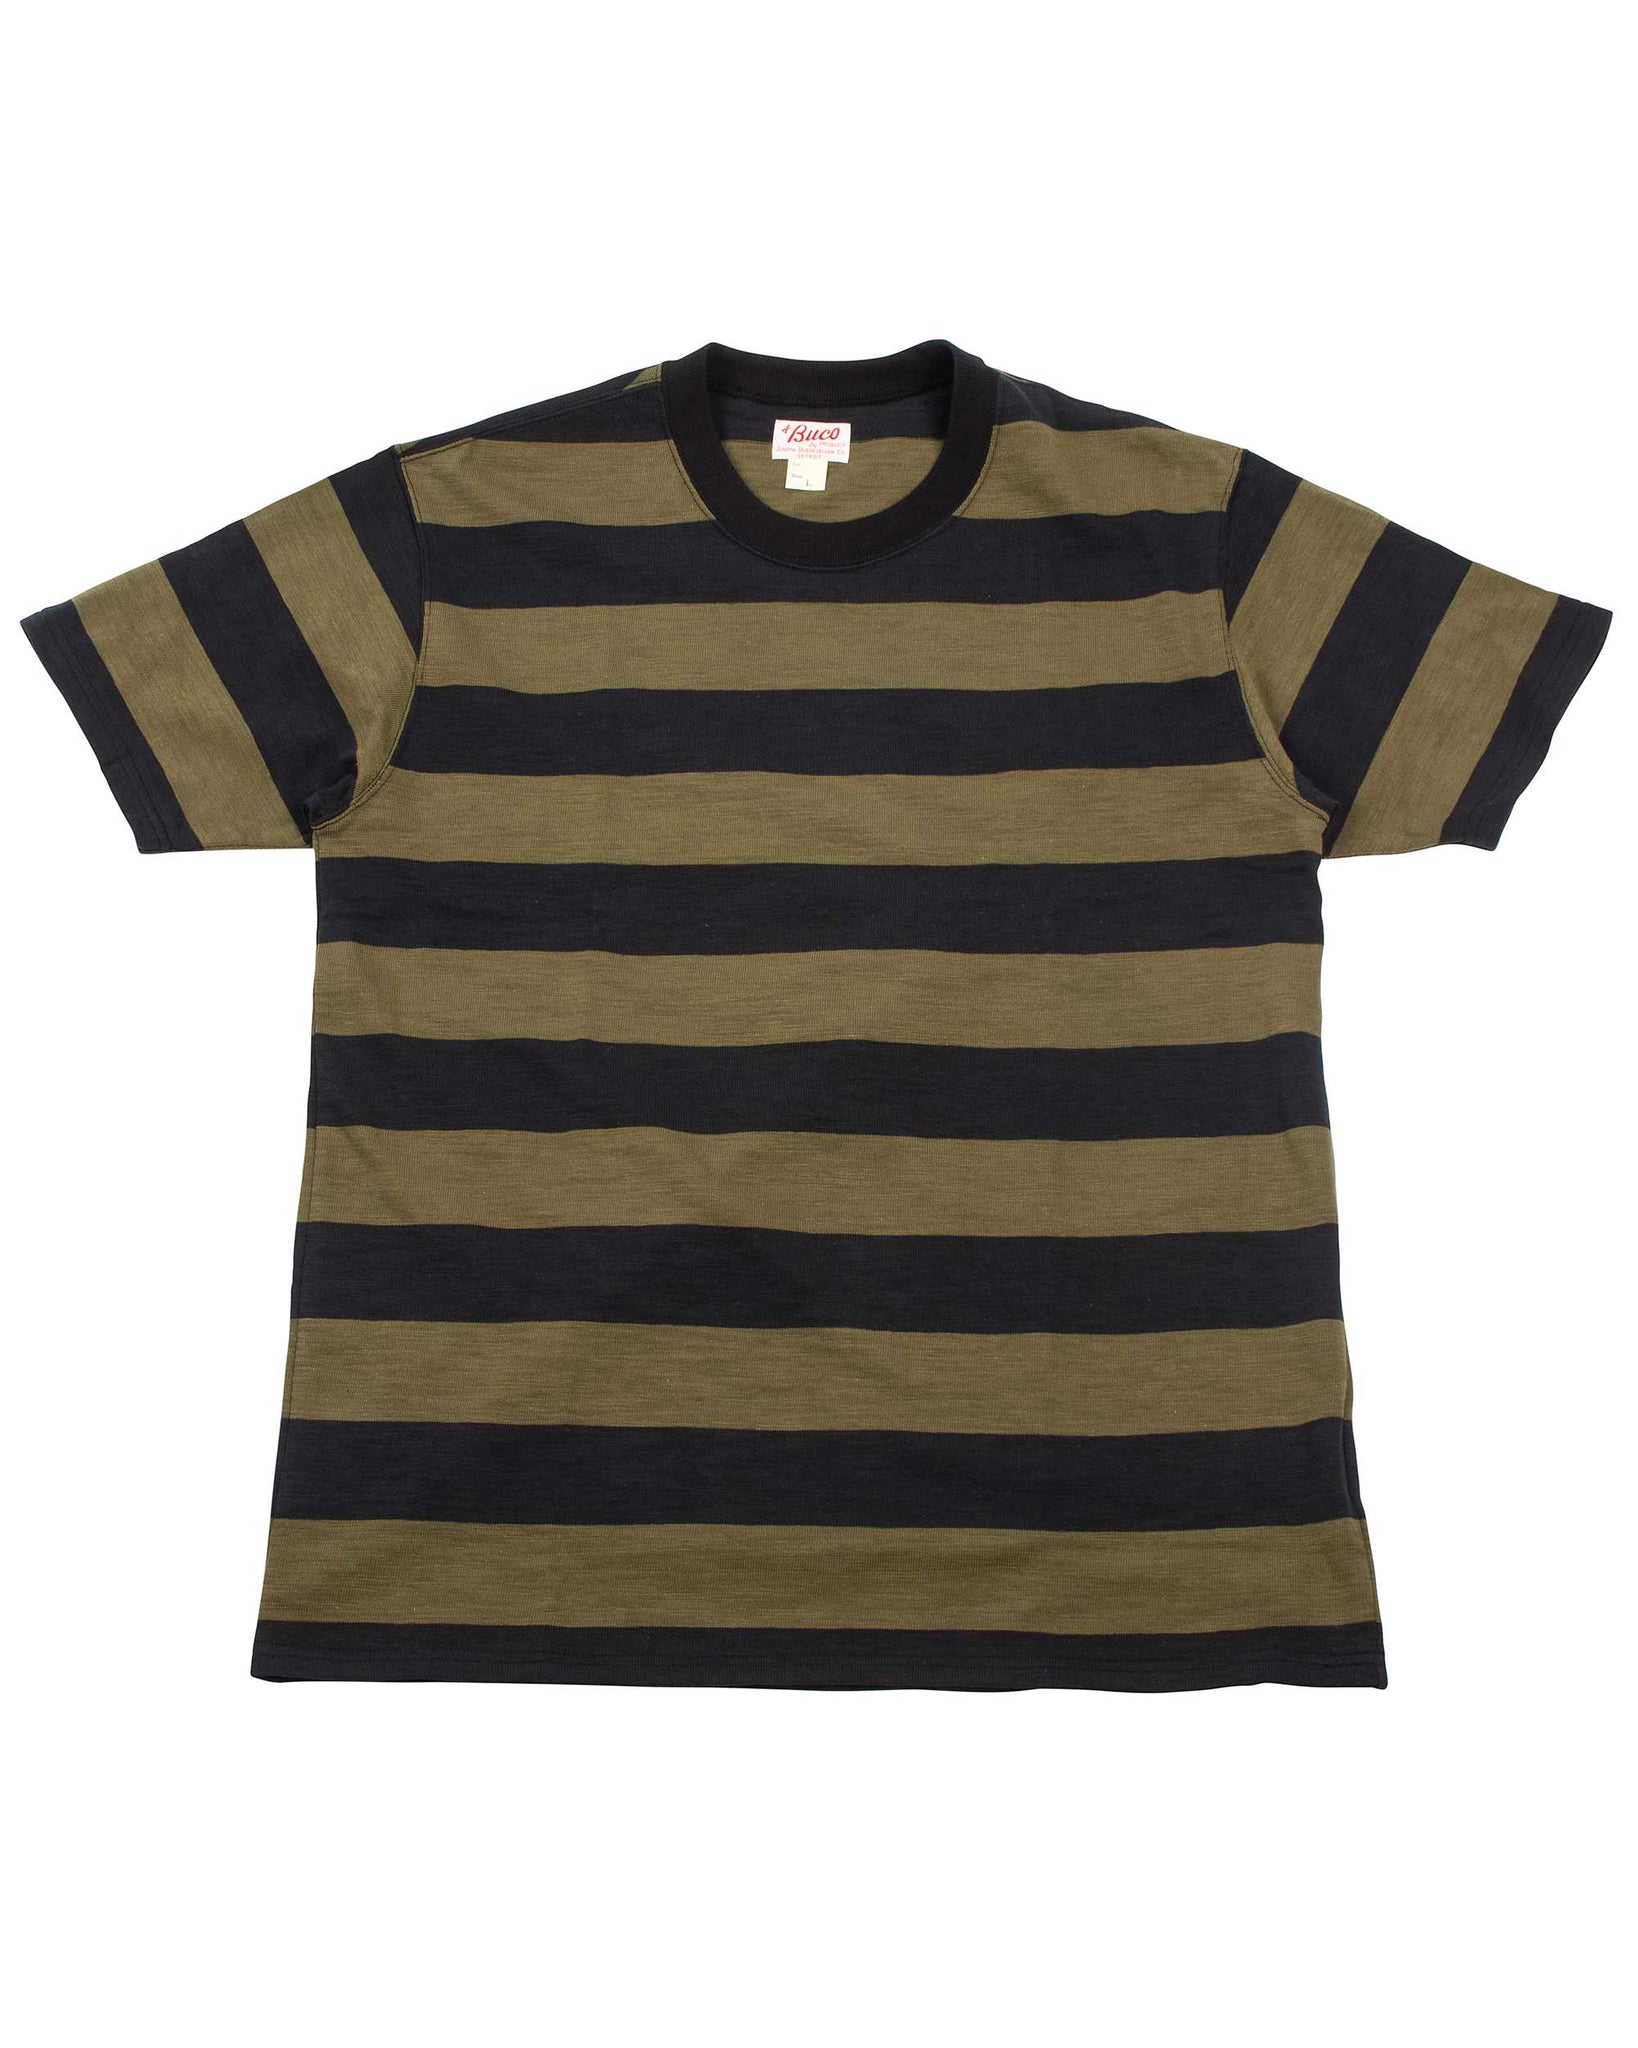 The Real McCoy's BC20007 Buco Stripe Tee S/S Olive